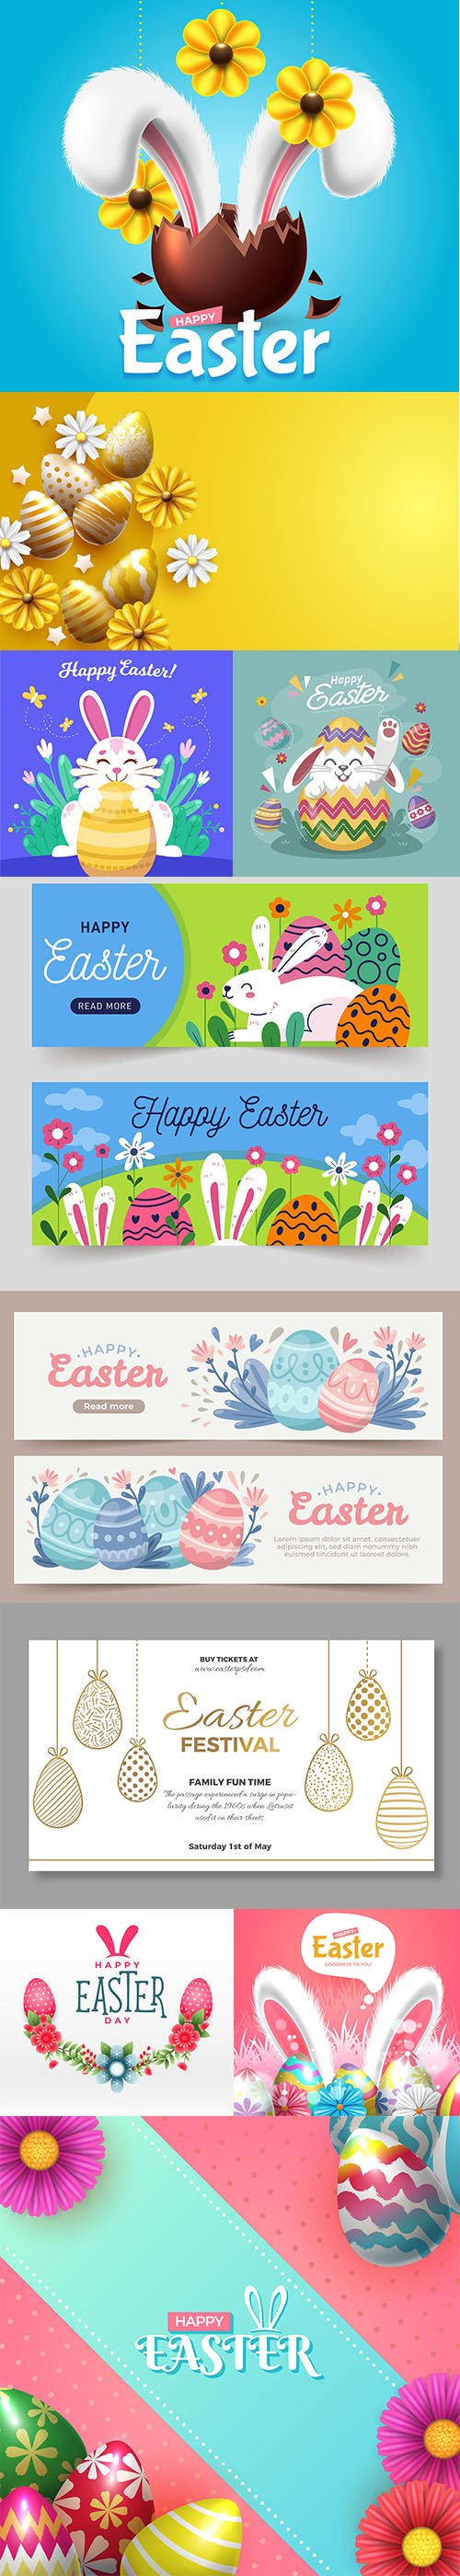 Hand-drawn cute easter illustrations and banner